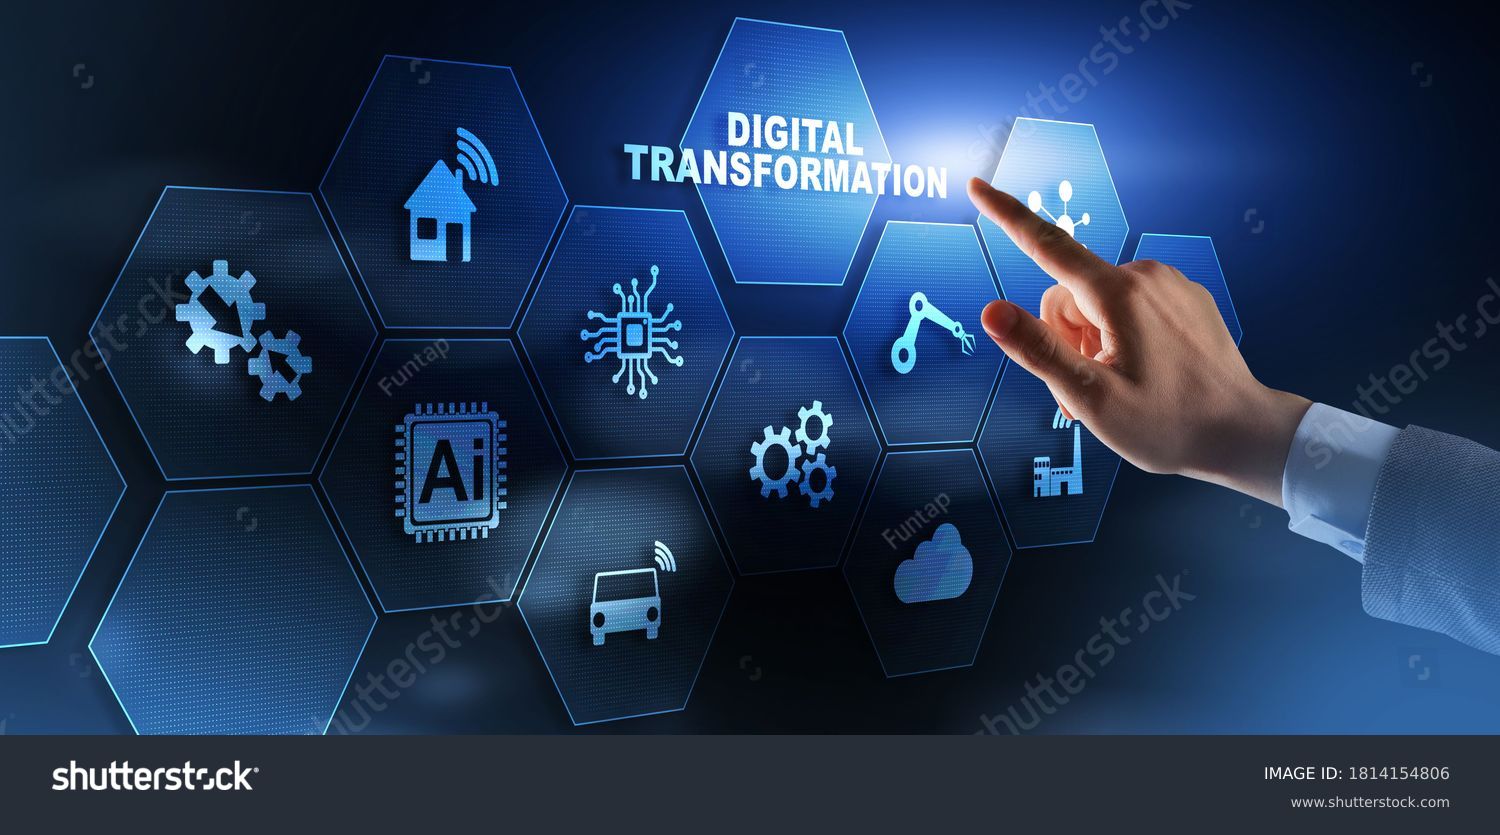 Digital Transformation and Digitalization Technology concept on Abstract Background. #1814154806